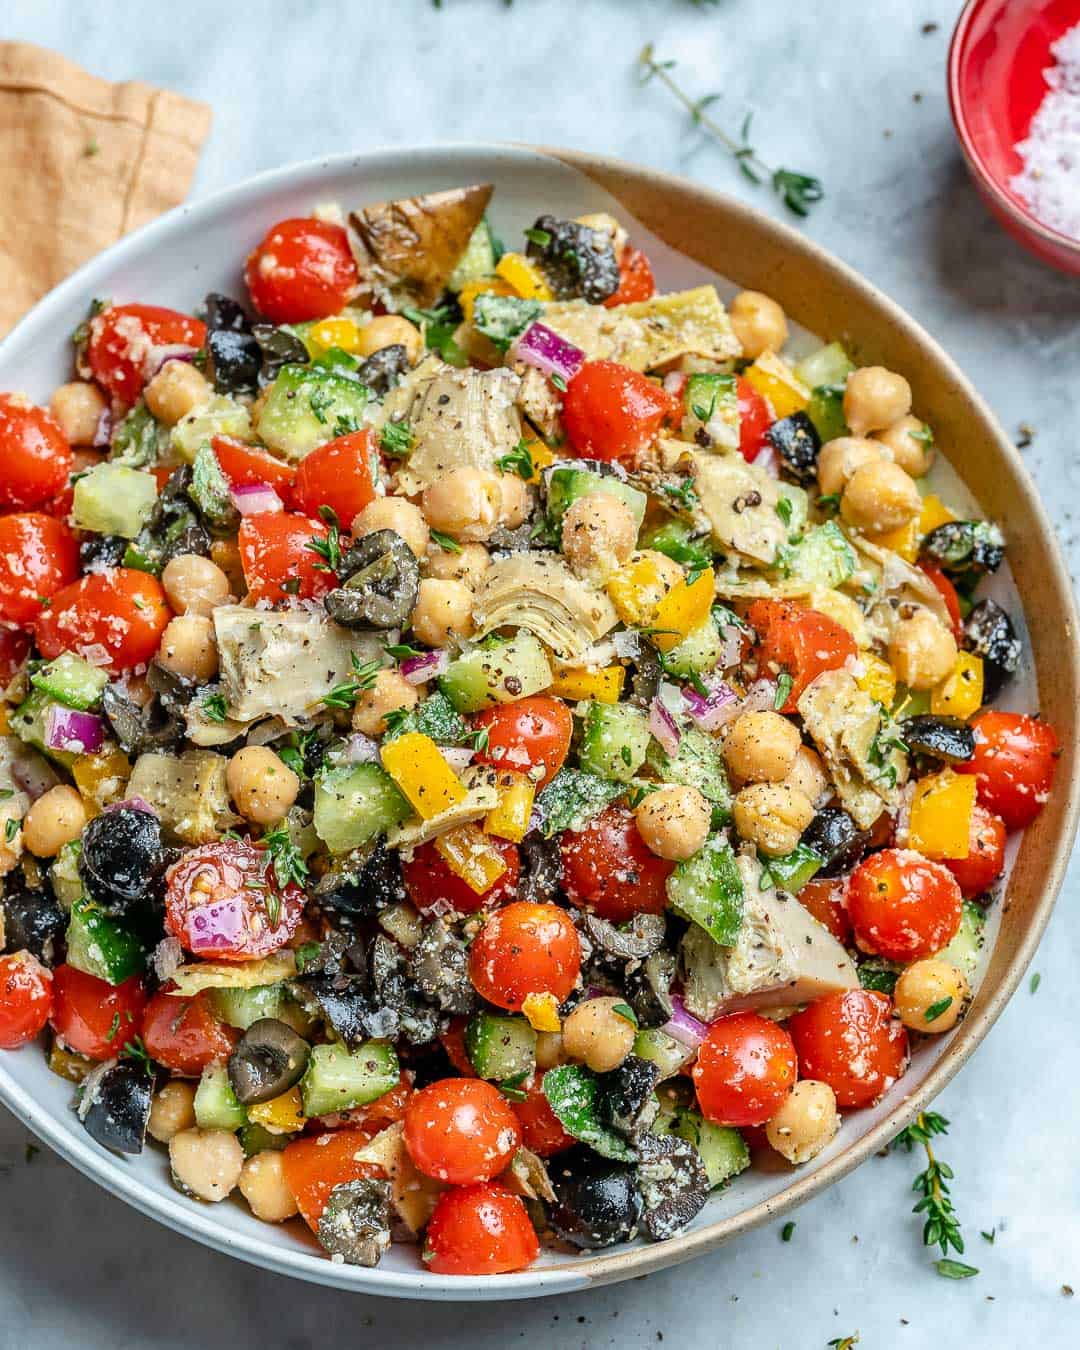 easy and healthy chickpea salad recipe with olives, feta cheese and artichoke hearts